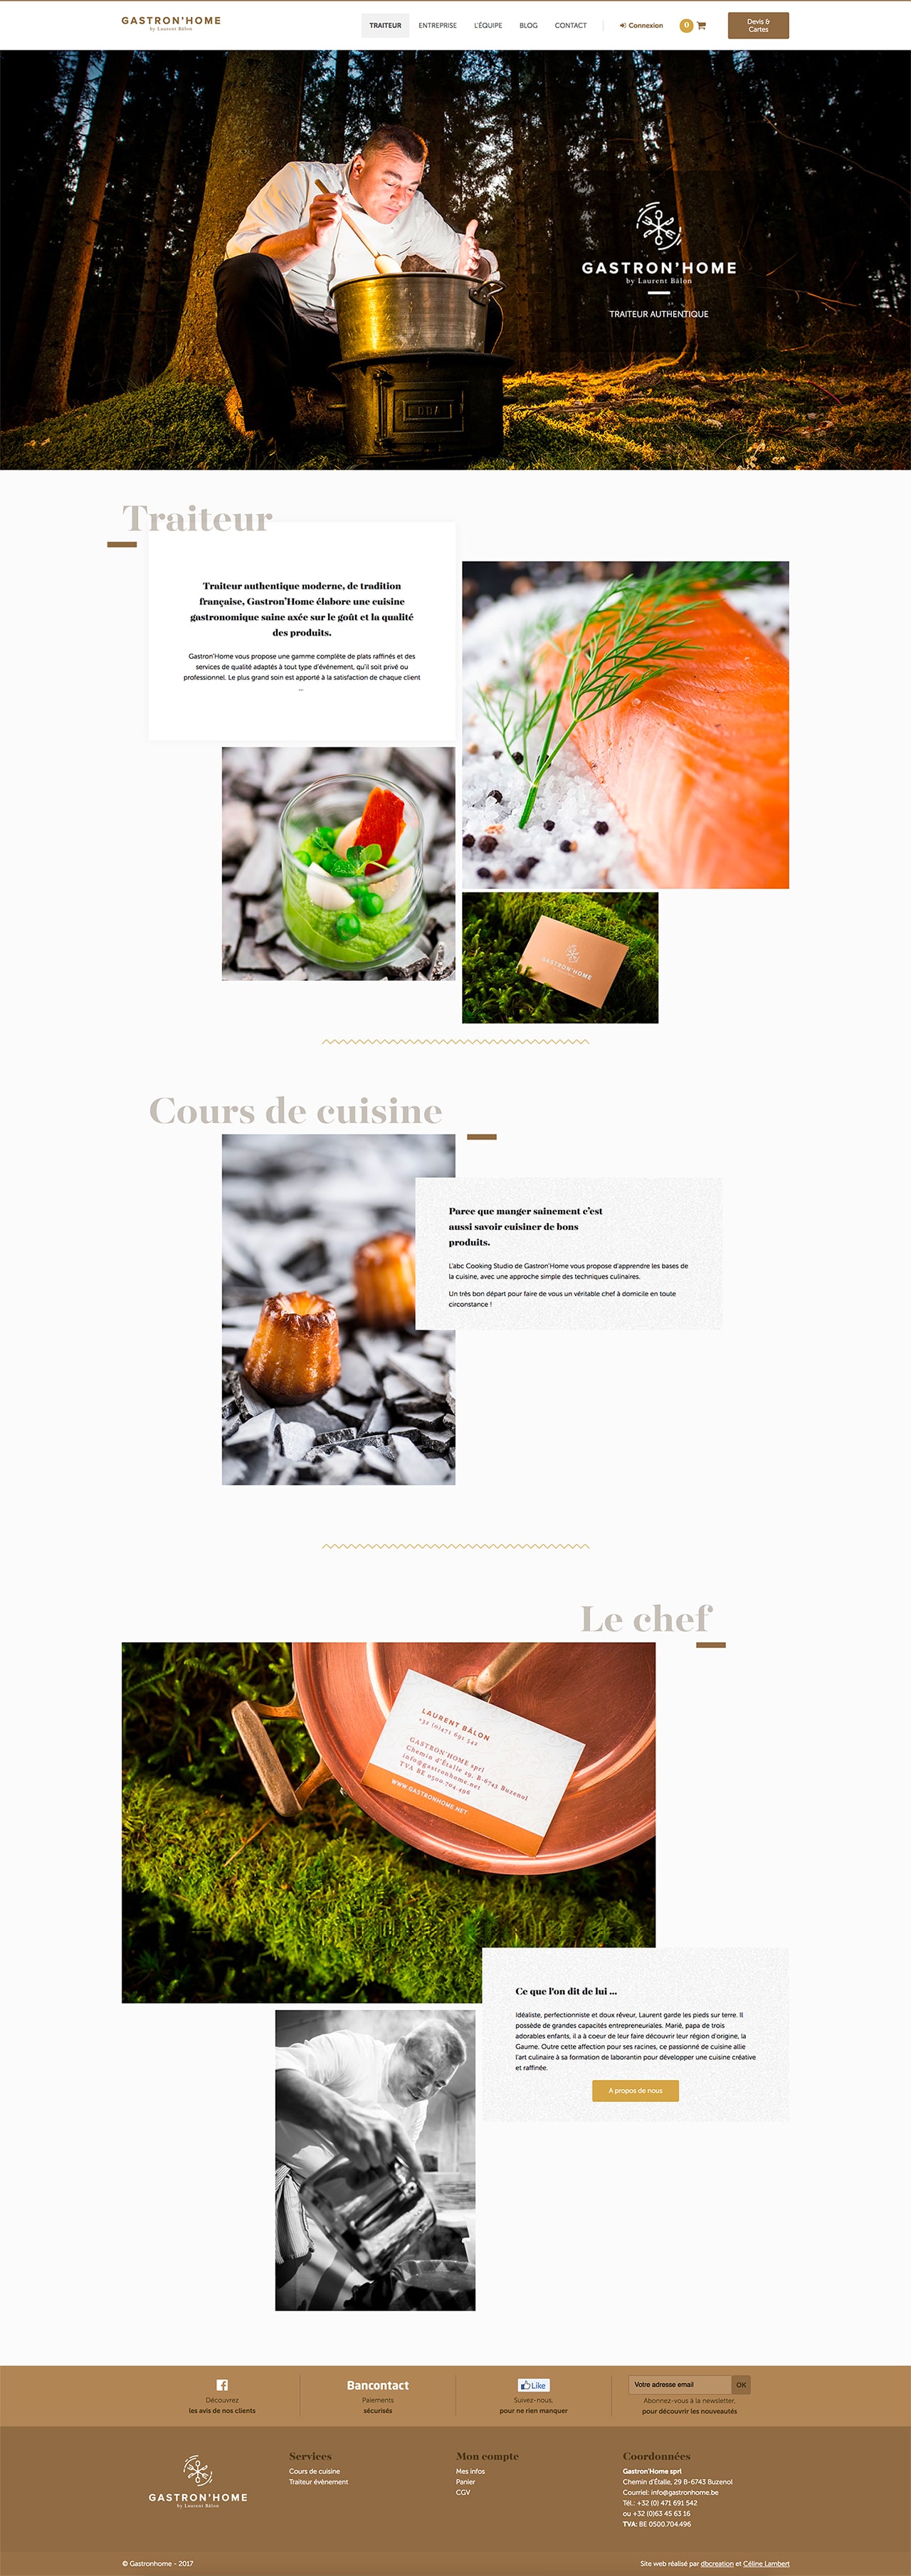 Homepage gastronhome.be